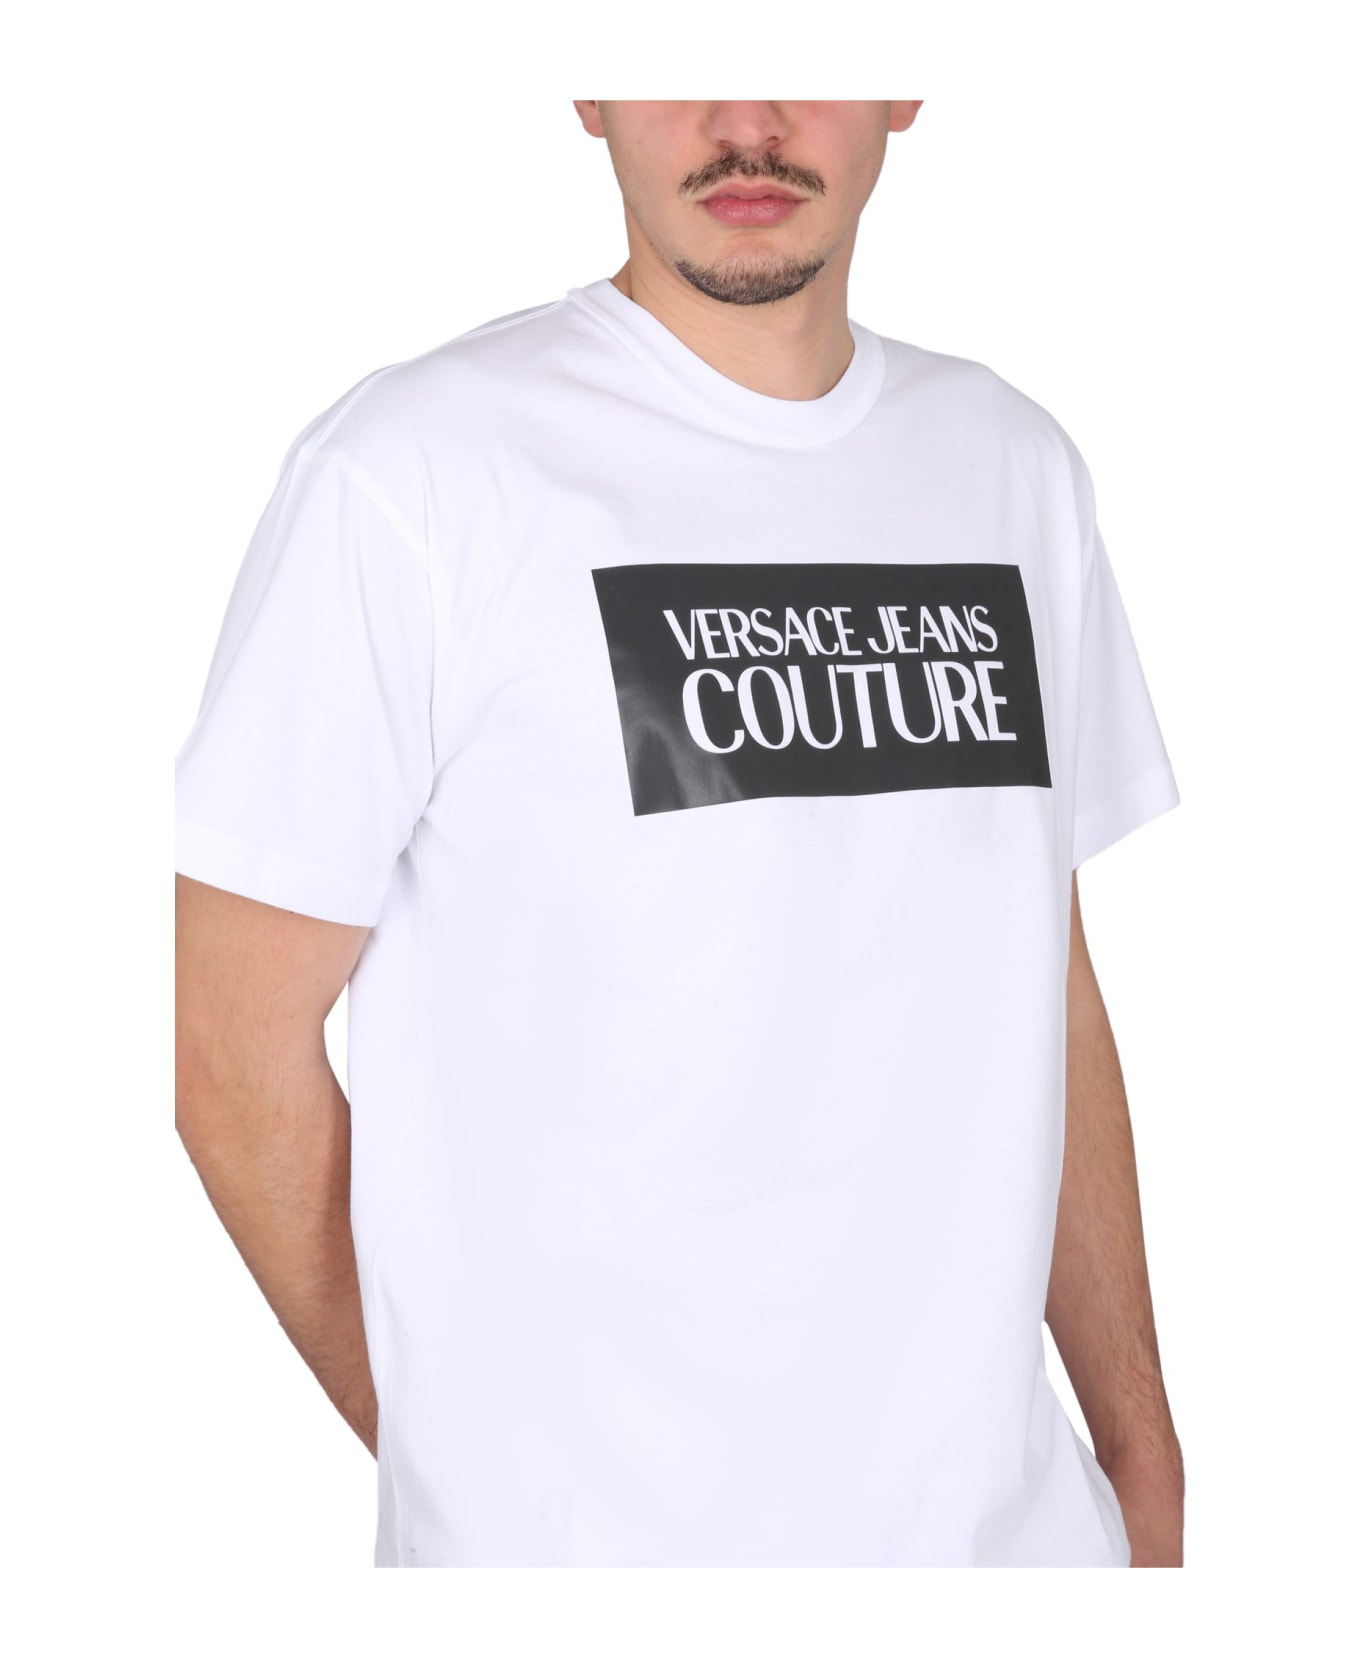 Versace Jeans Couture T-shirt - BIANCO